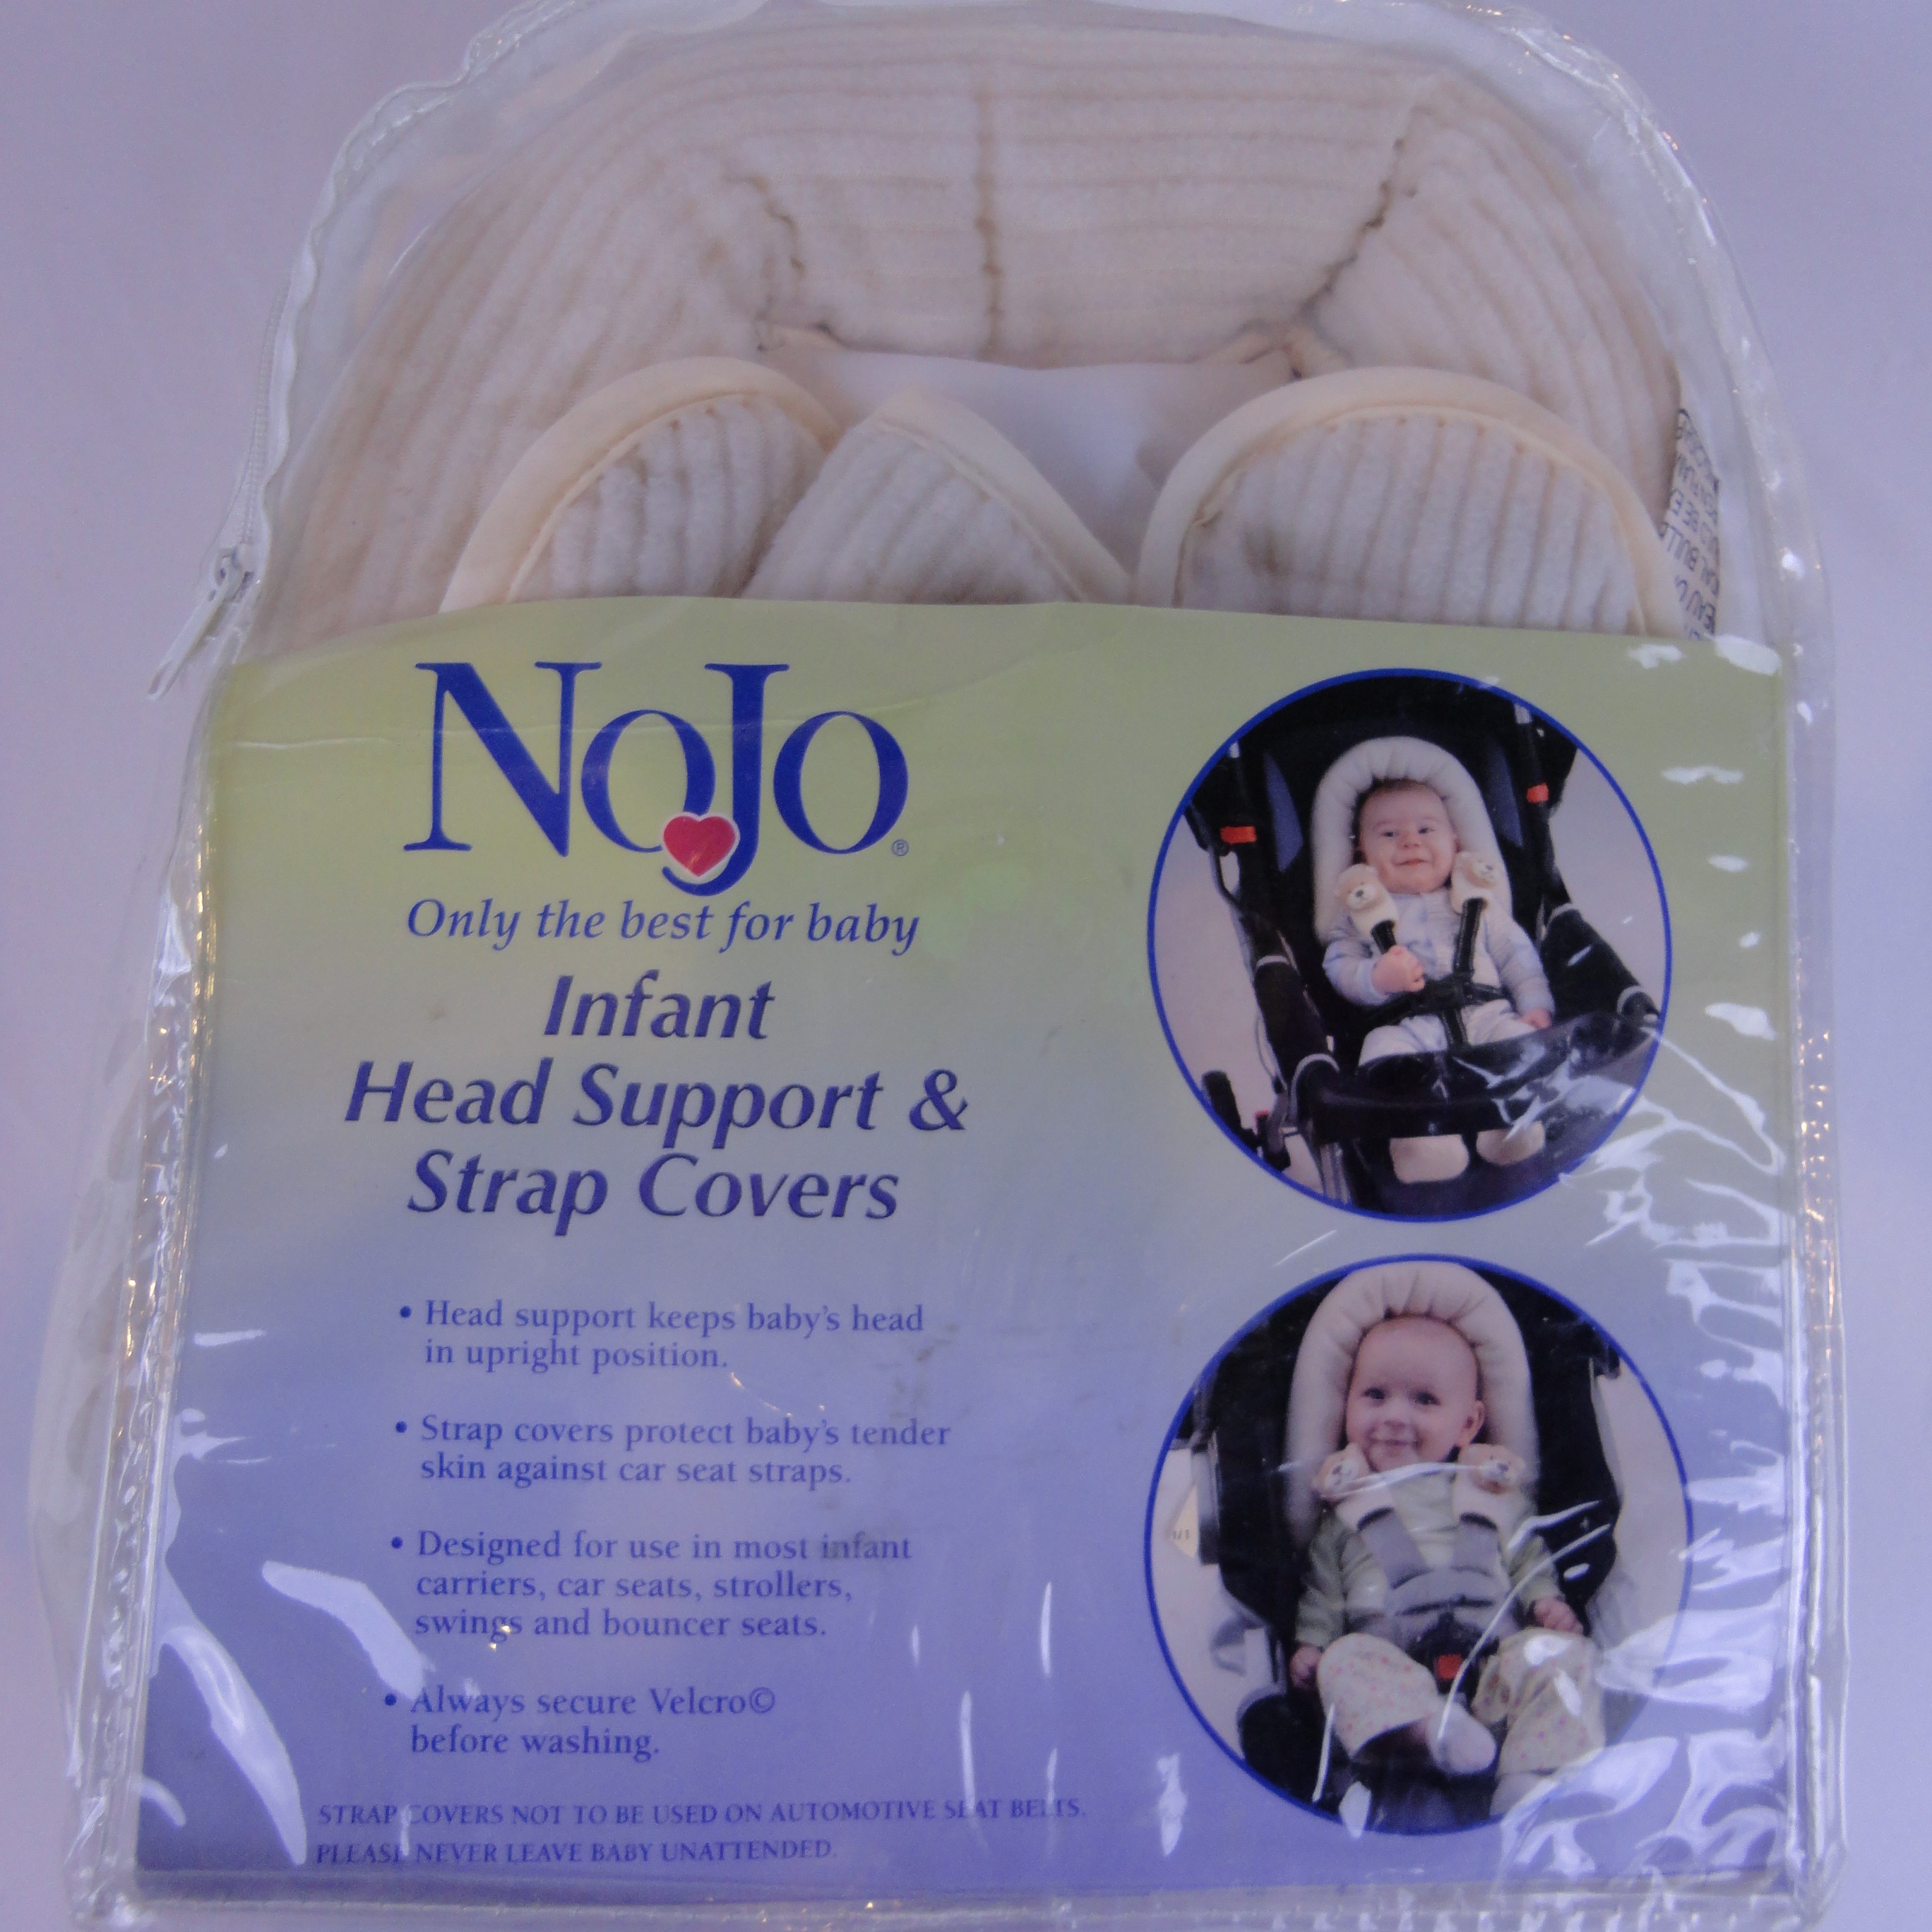 NoJo Infant Head Support and Strap Covers (New) - GoodBye Toys